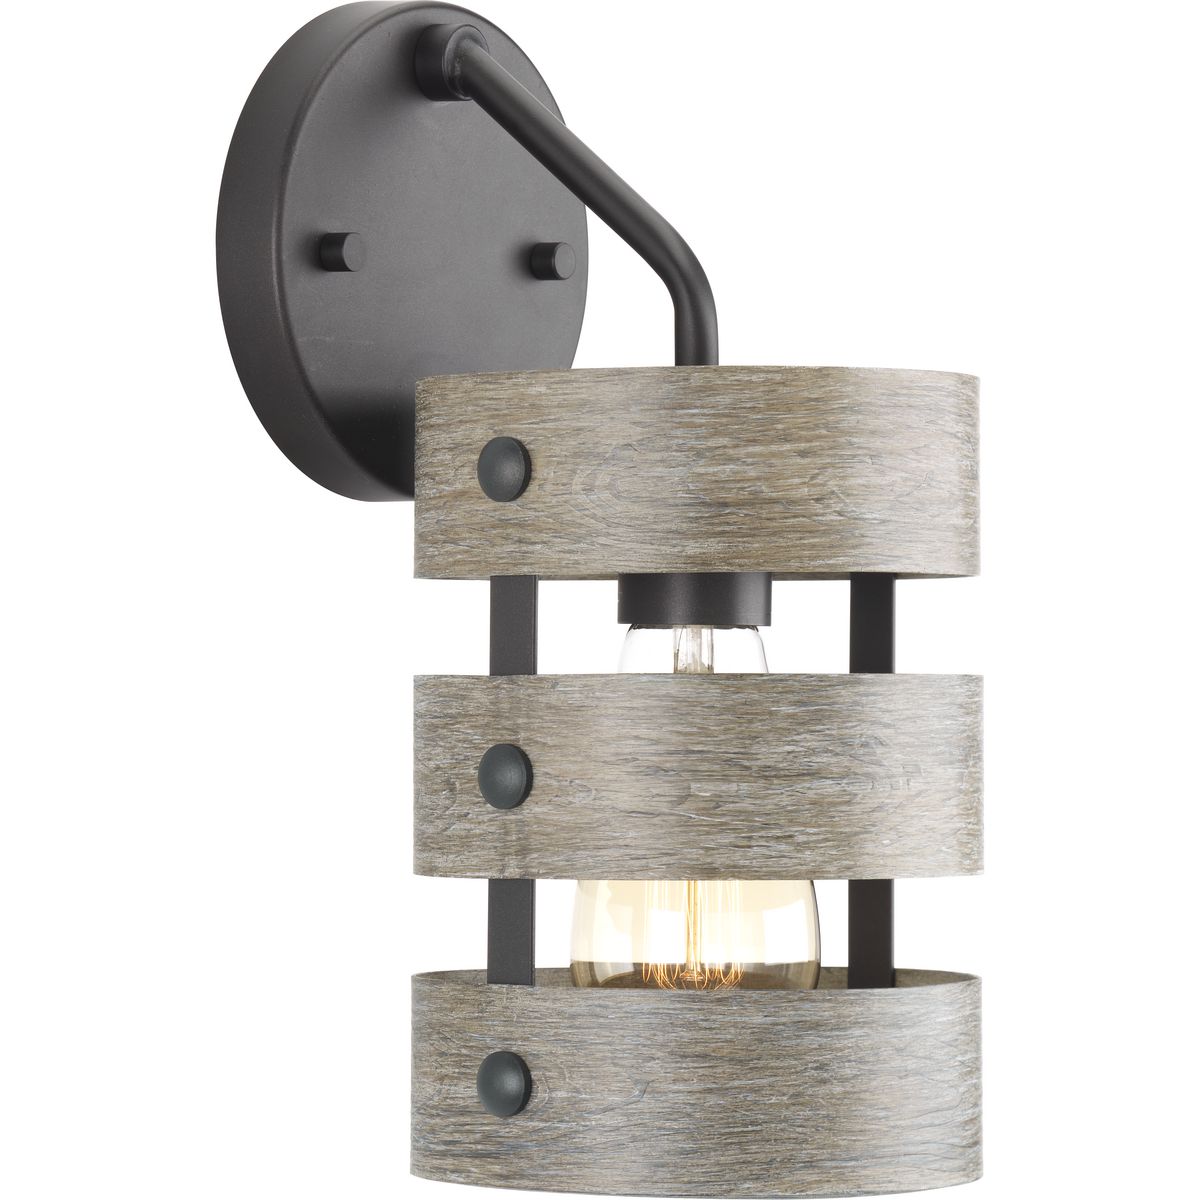 PROGRESS LIGHTING P710031-143 Graphite Gulliver Collection Wall Sconce